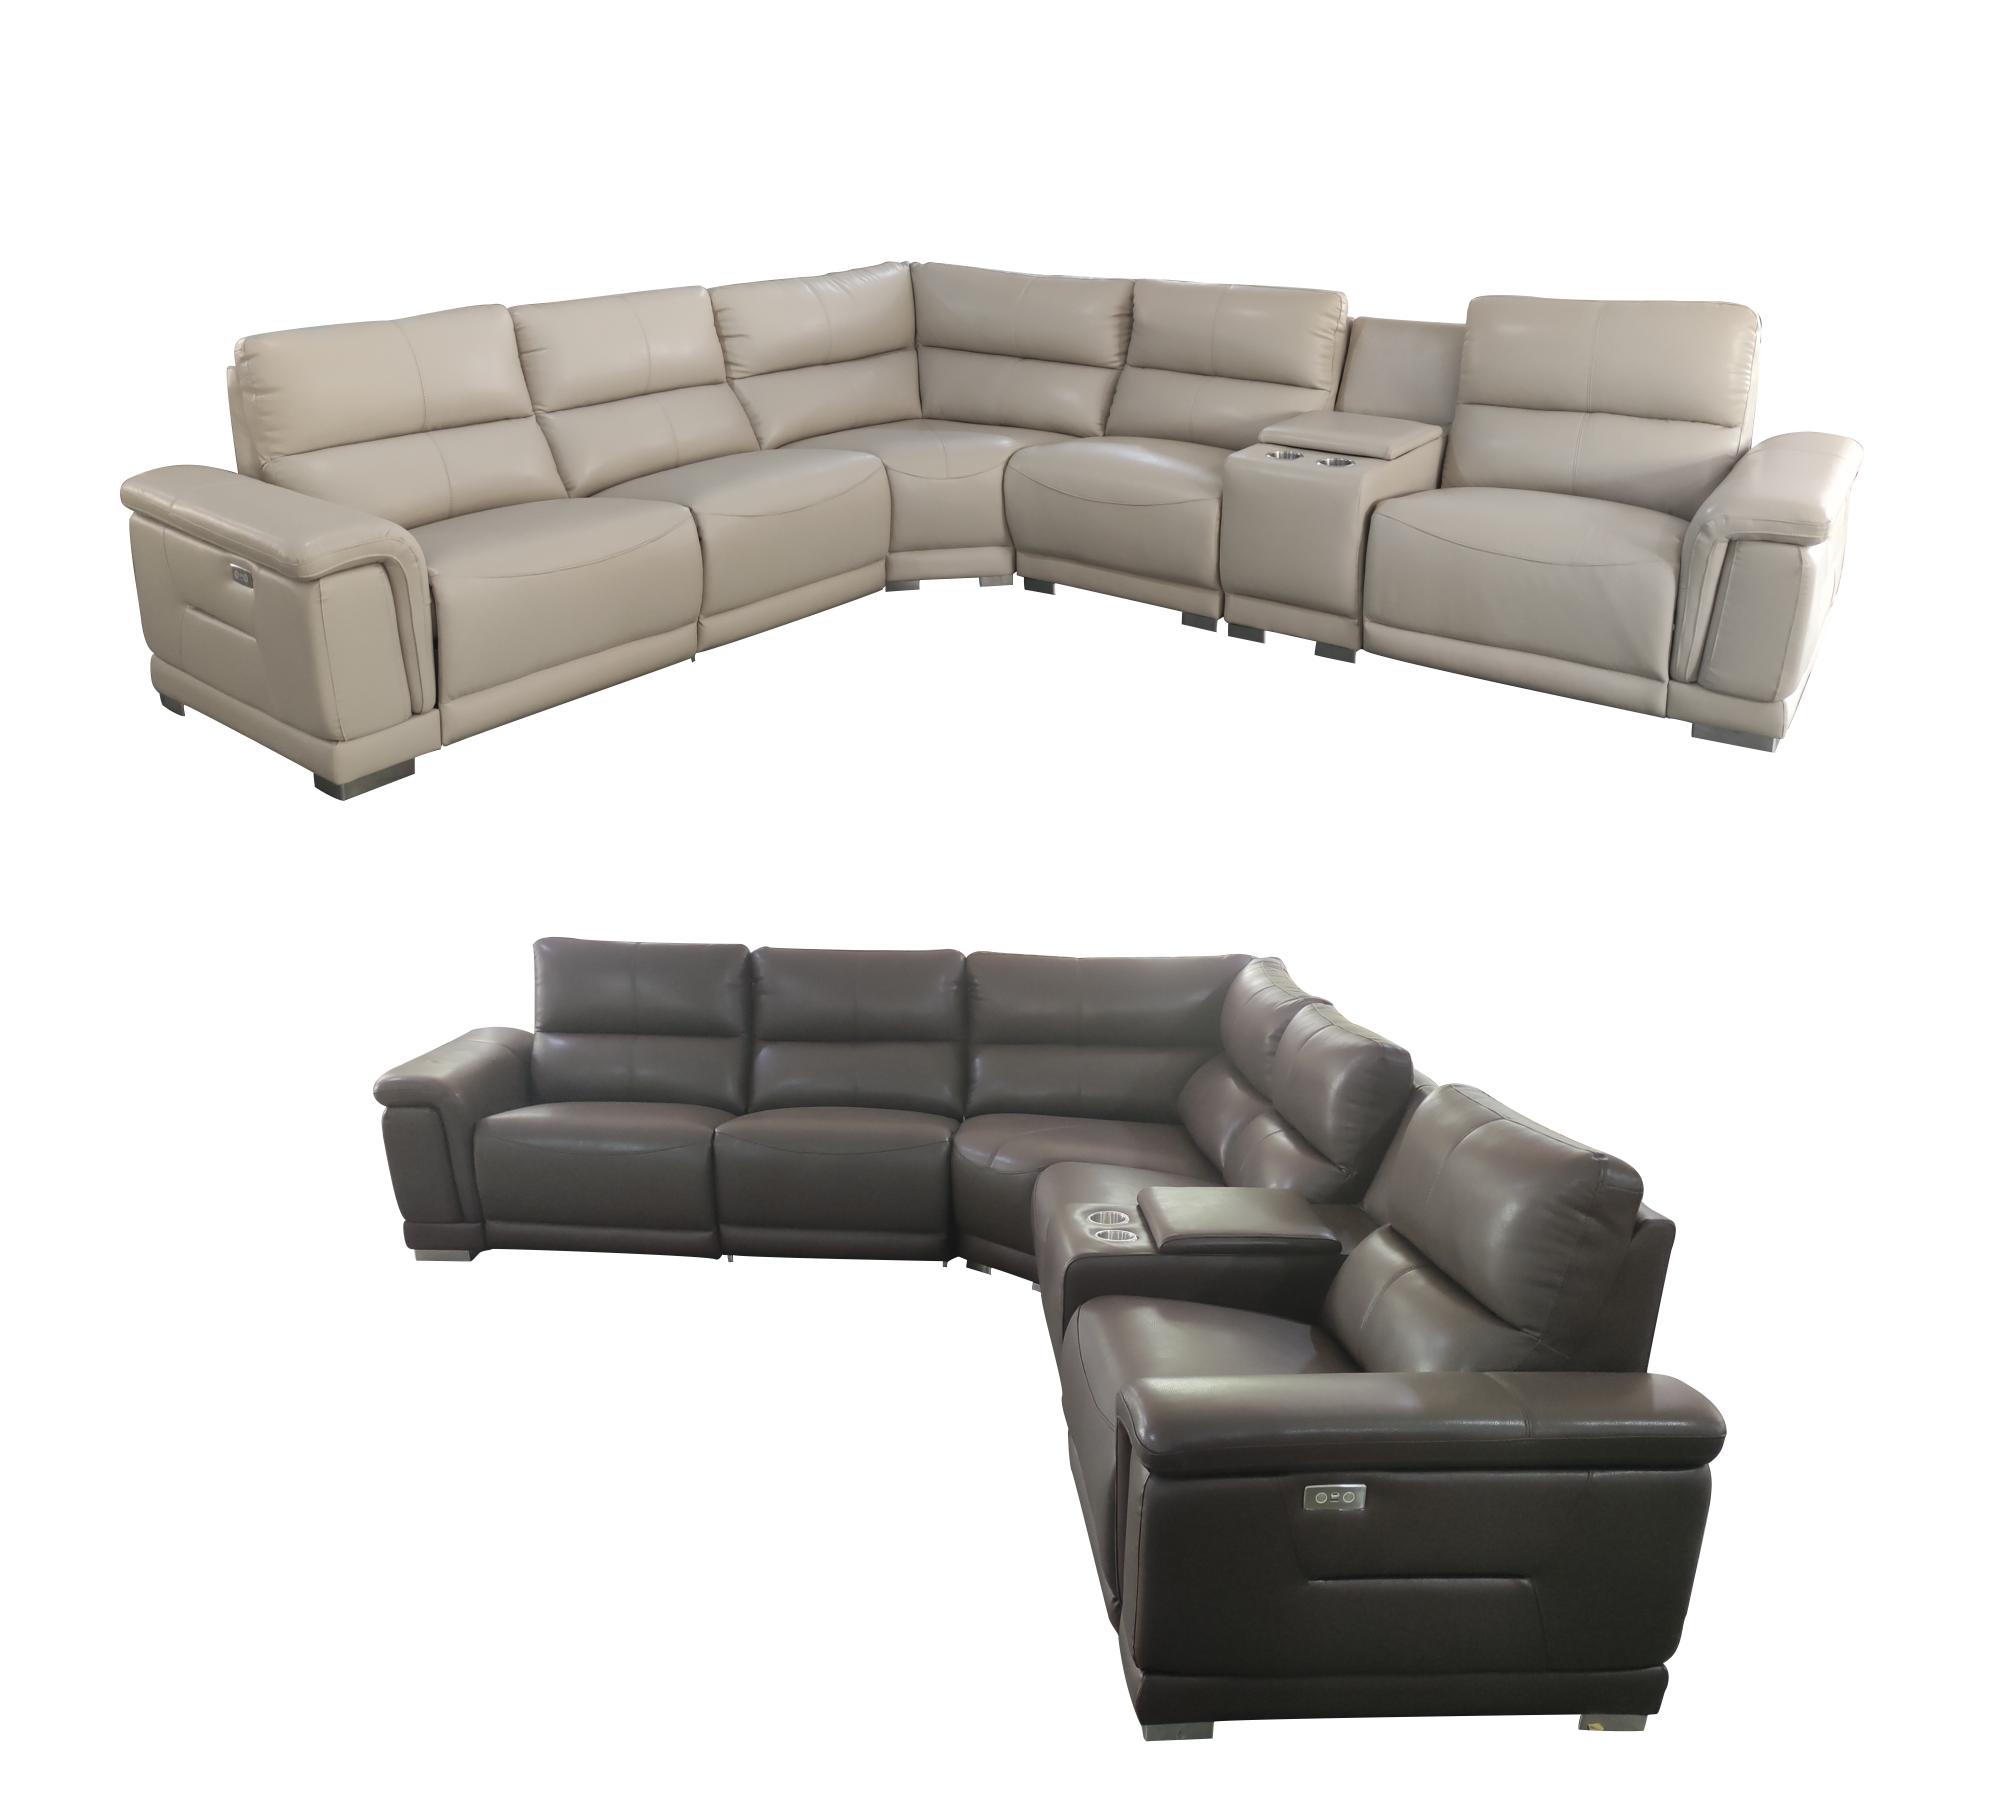 Living Room Furniture Sofas Loveseats and Chairs 2901 Sectional w/recliner